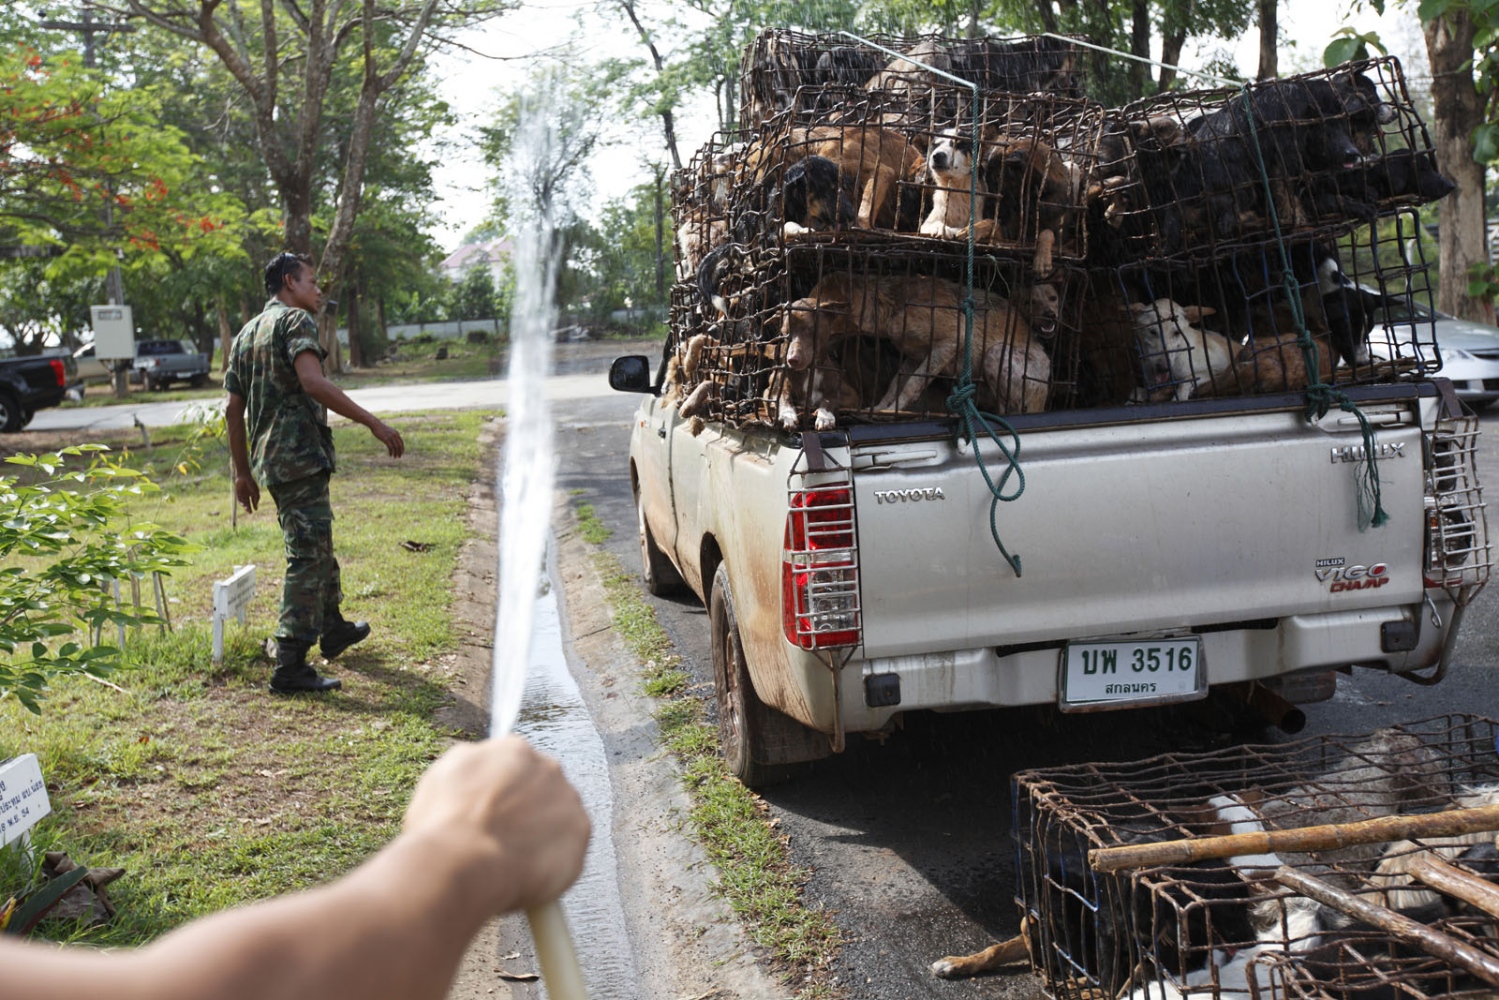 THAILAND'S ILLEGAL DOG MEAT TRADE - Soldiers from the Thai River Navy who saved 130 dogs in...